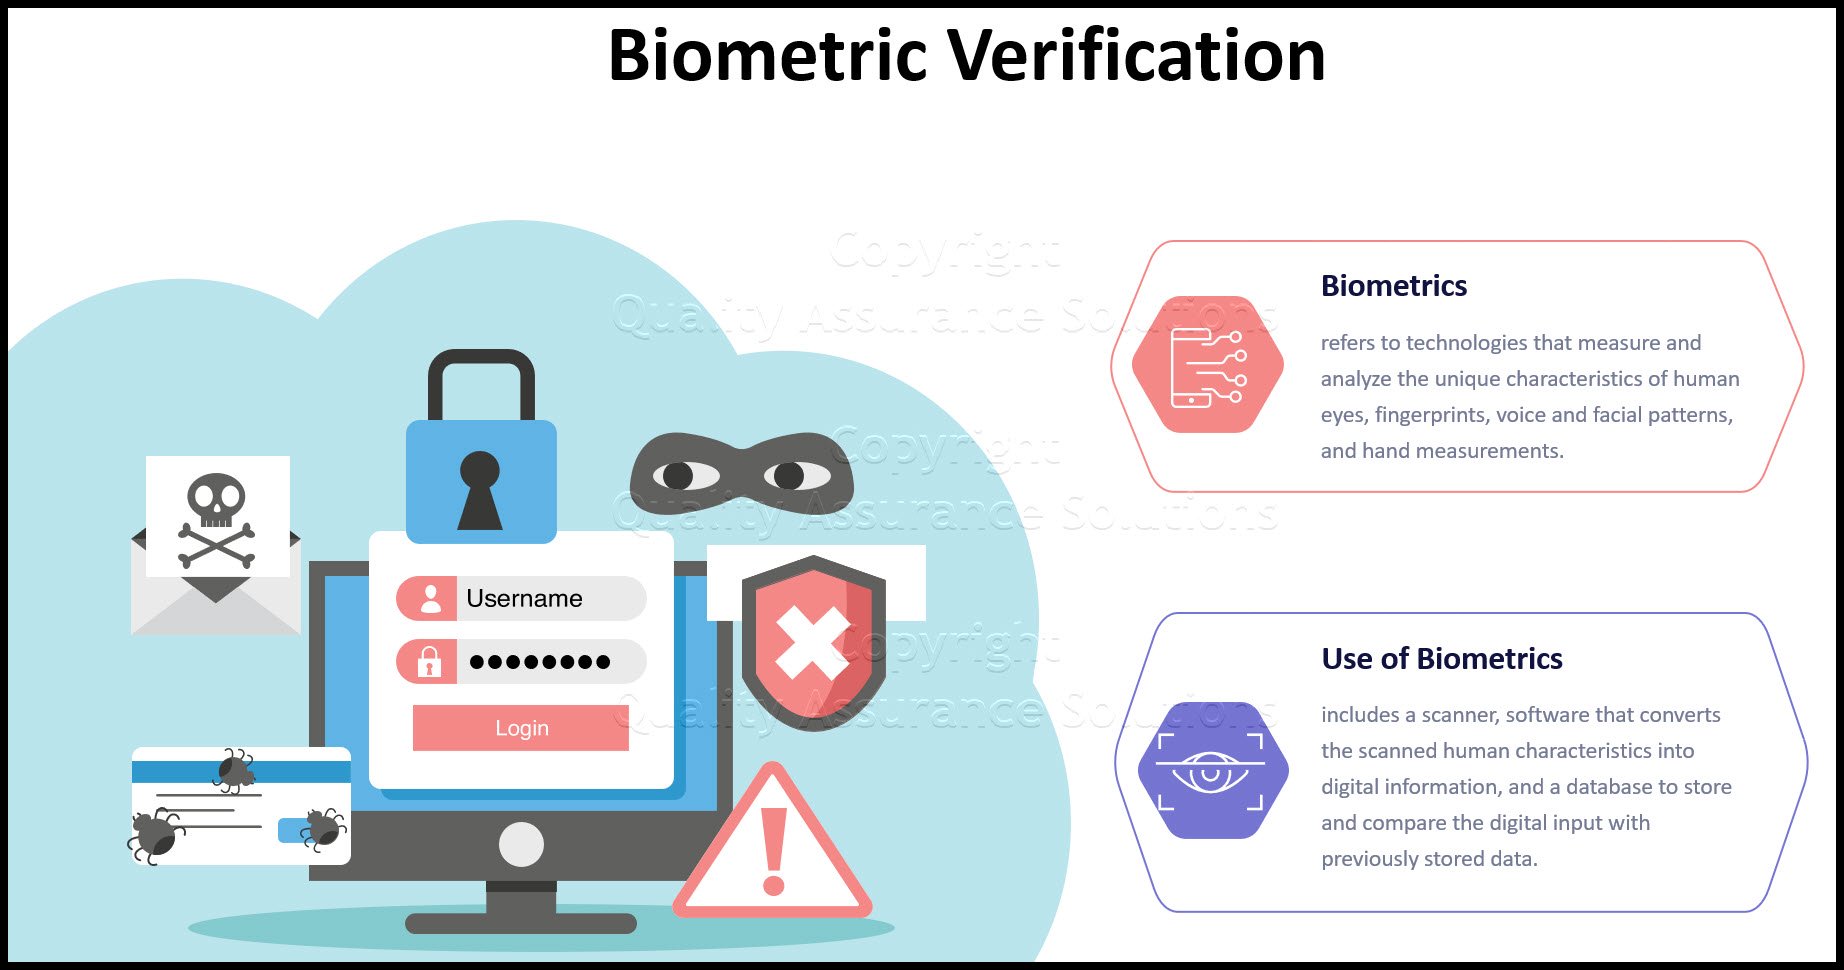 The future of computer security is biometric verification